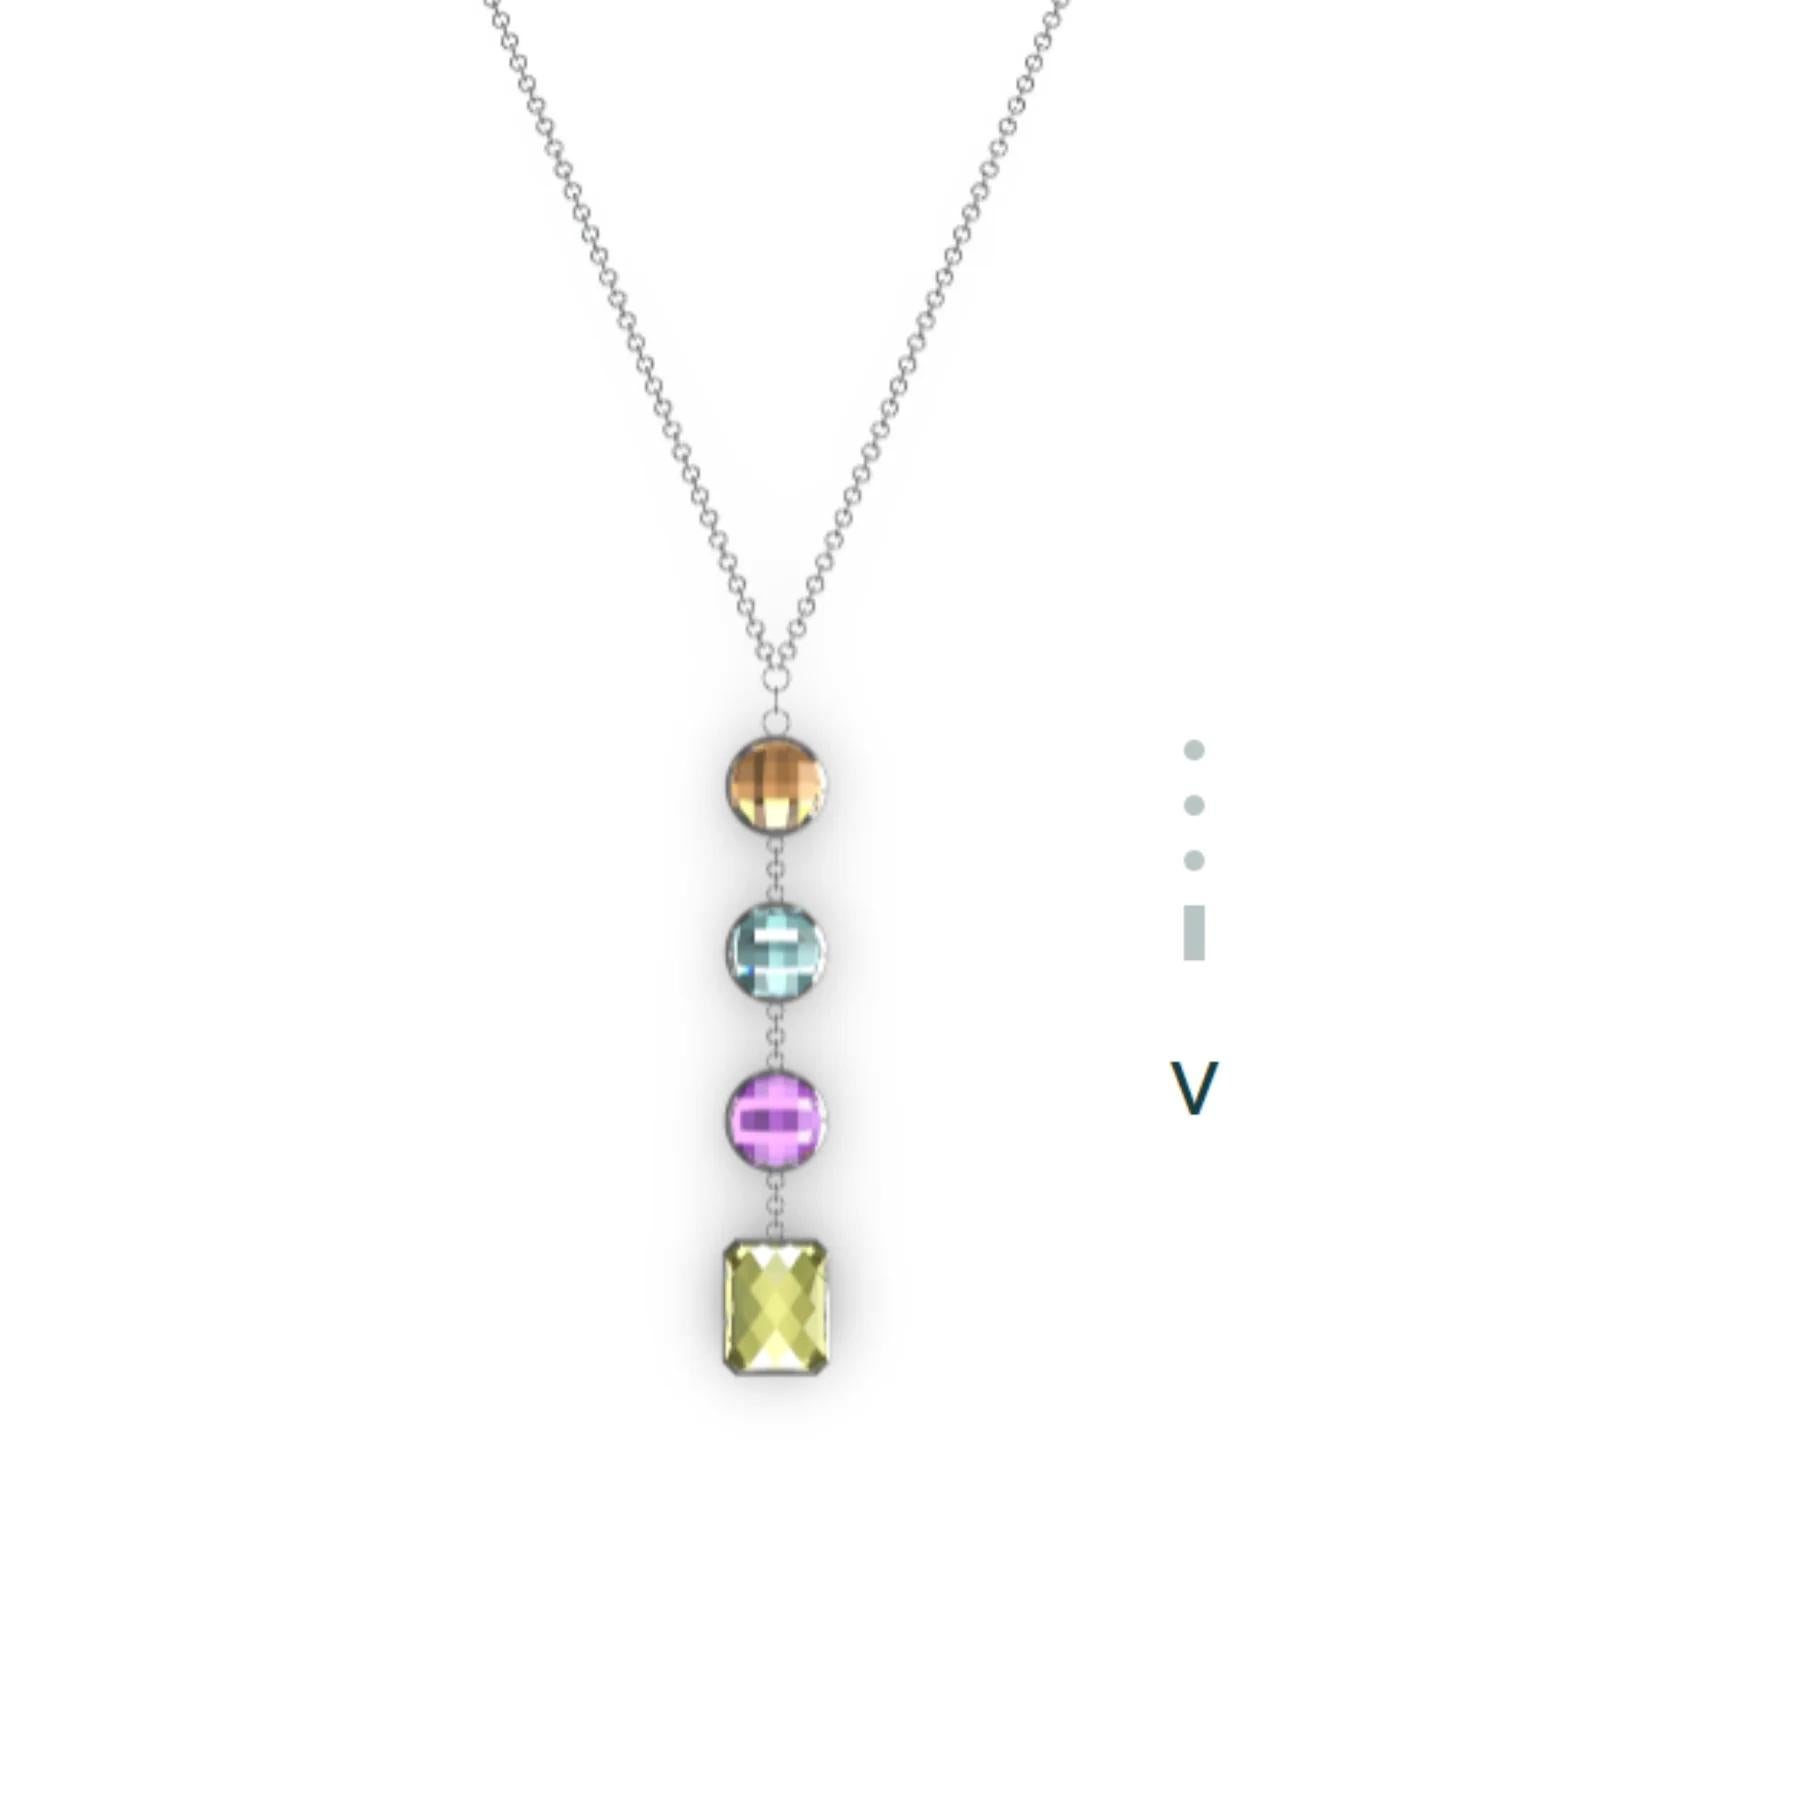 V is for Virtue, Values, Veritas… Encode the letters of your name, your children's initials, your lucky numbers, or a secret message of inspiration.

Details of this piece:
Handcrafted
Recycled 925 sterling silver

About Us
In the intricate dance of